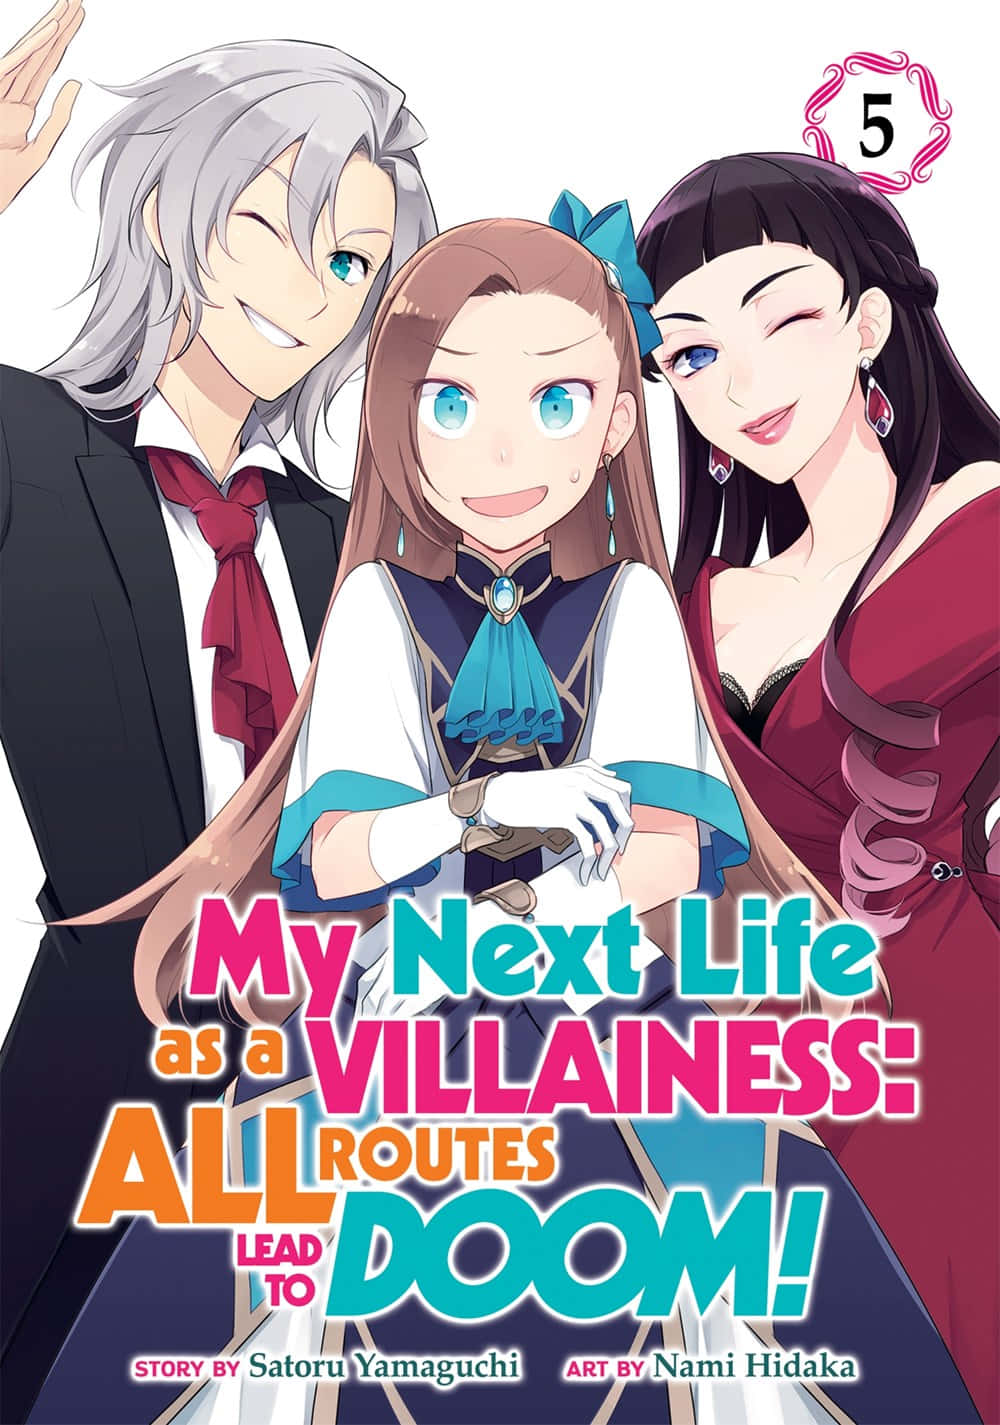 Join Catarina on her adventure to alter her fate in My Next Life as a Villainess: All Routes Lead to Doom. Wallpaper